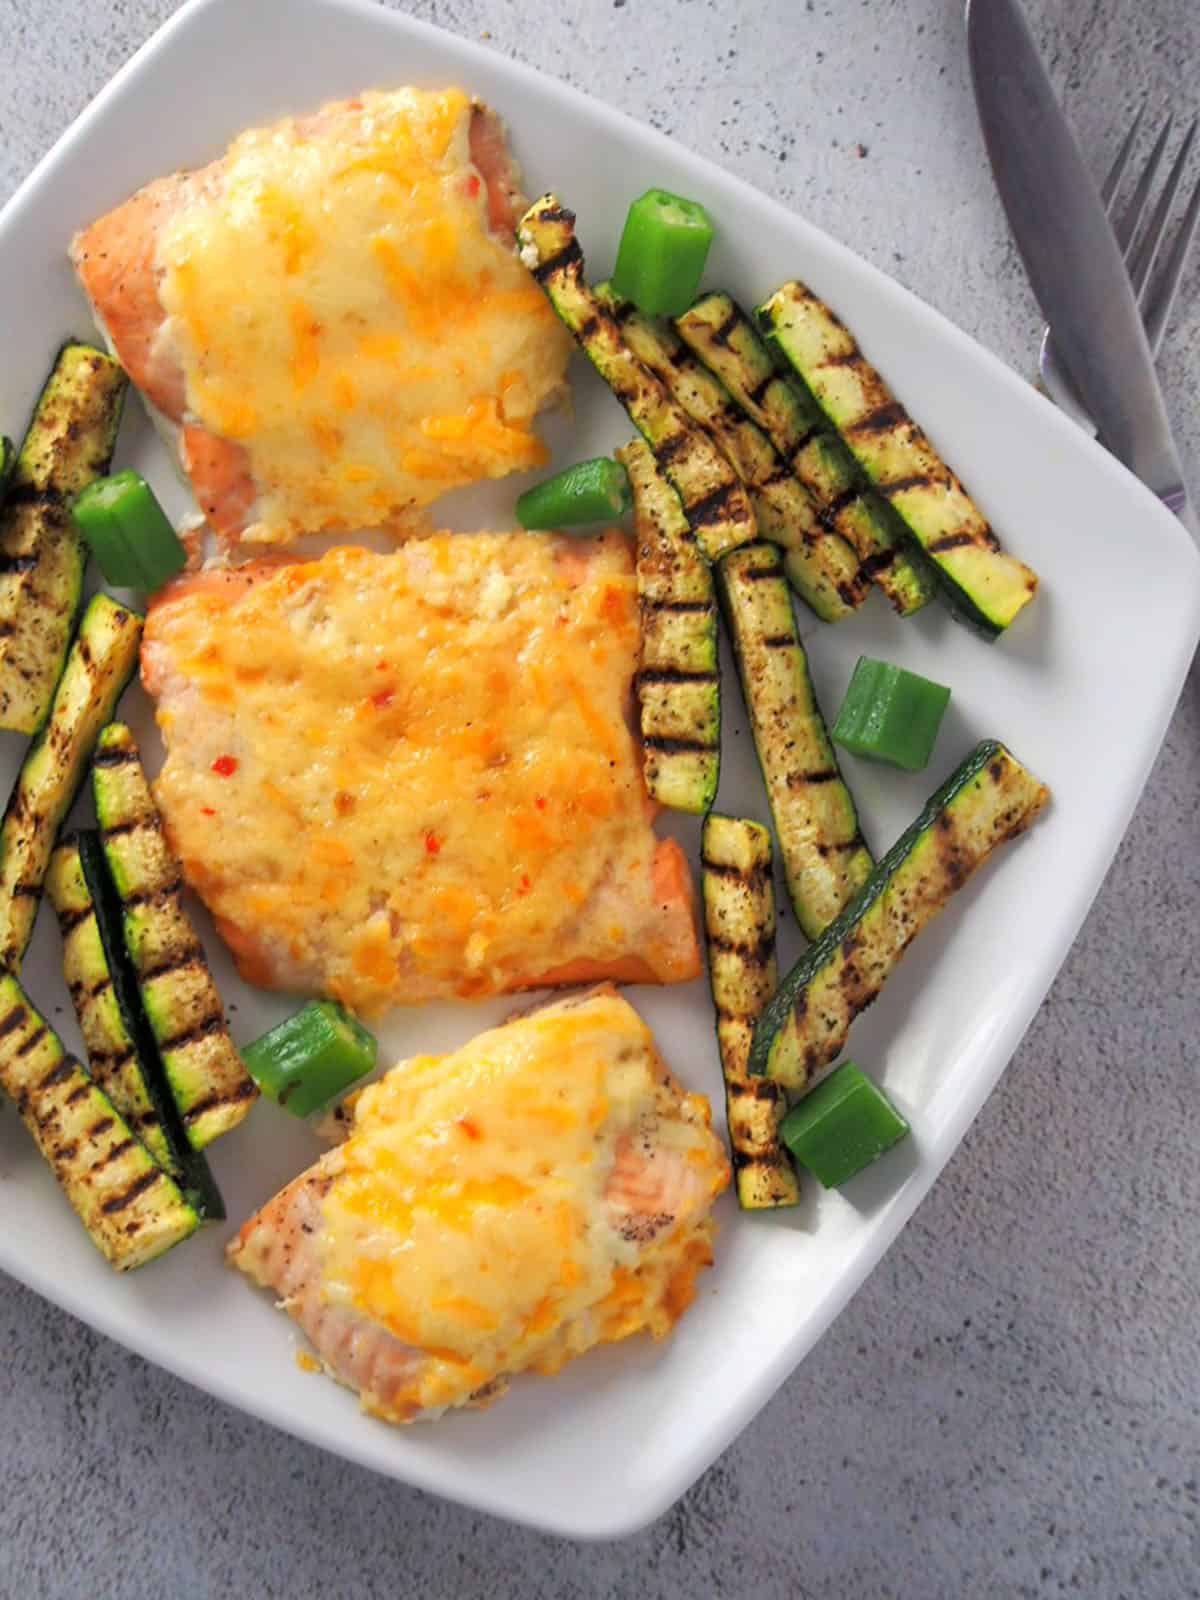 salmon with cheesy sweet chili mayo topping on a plate with grilled zucchini